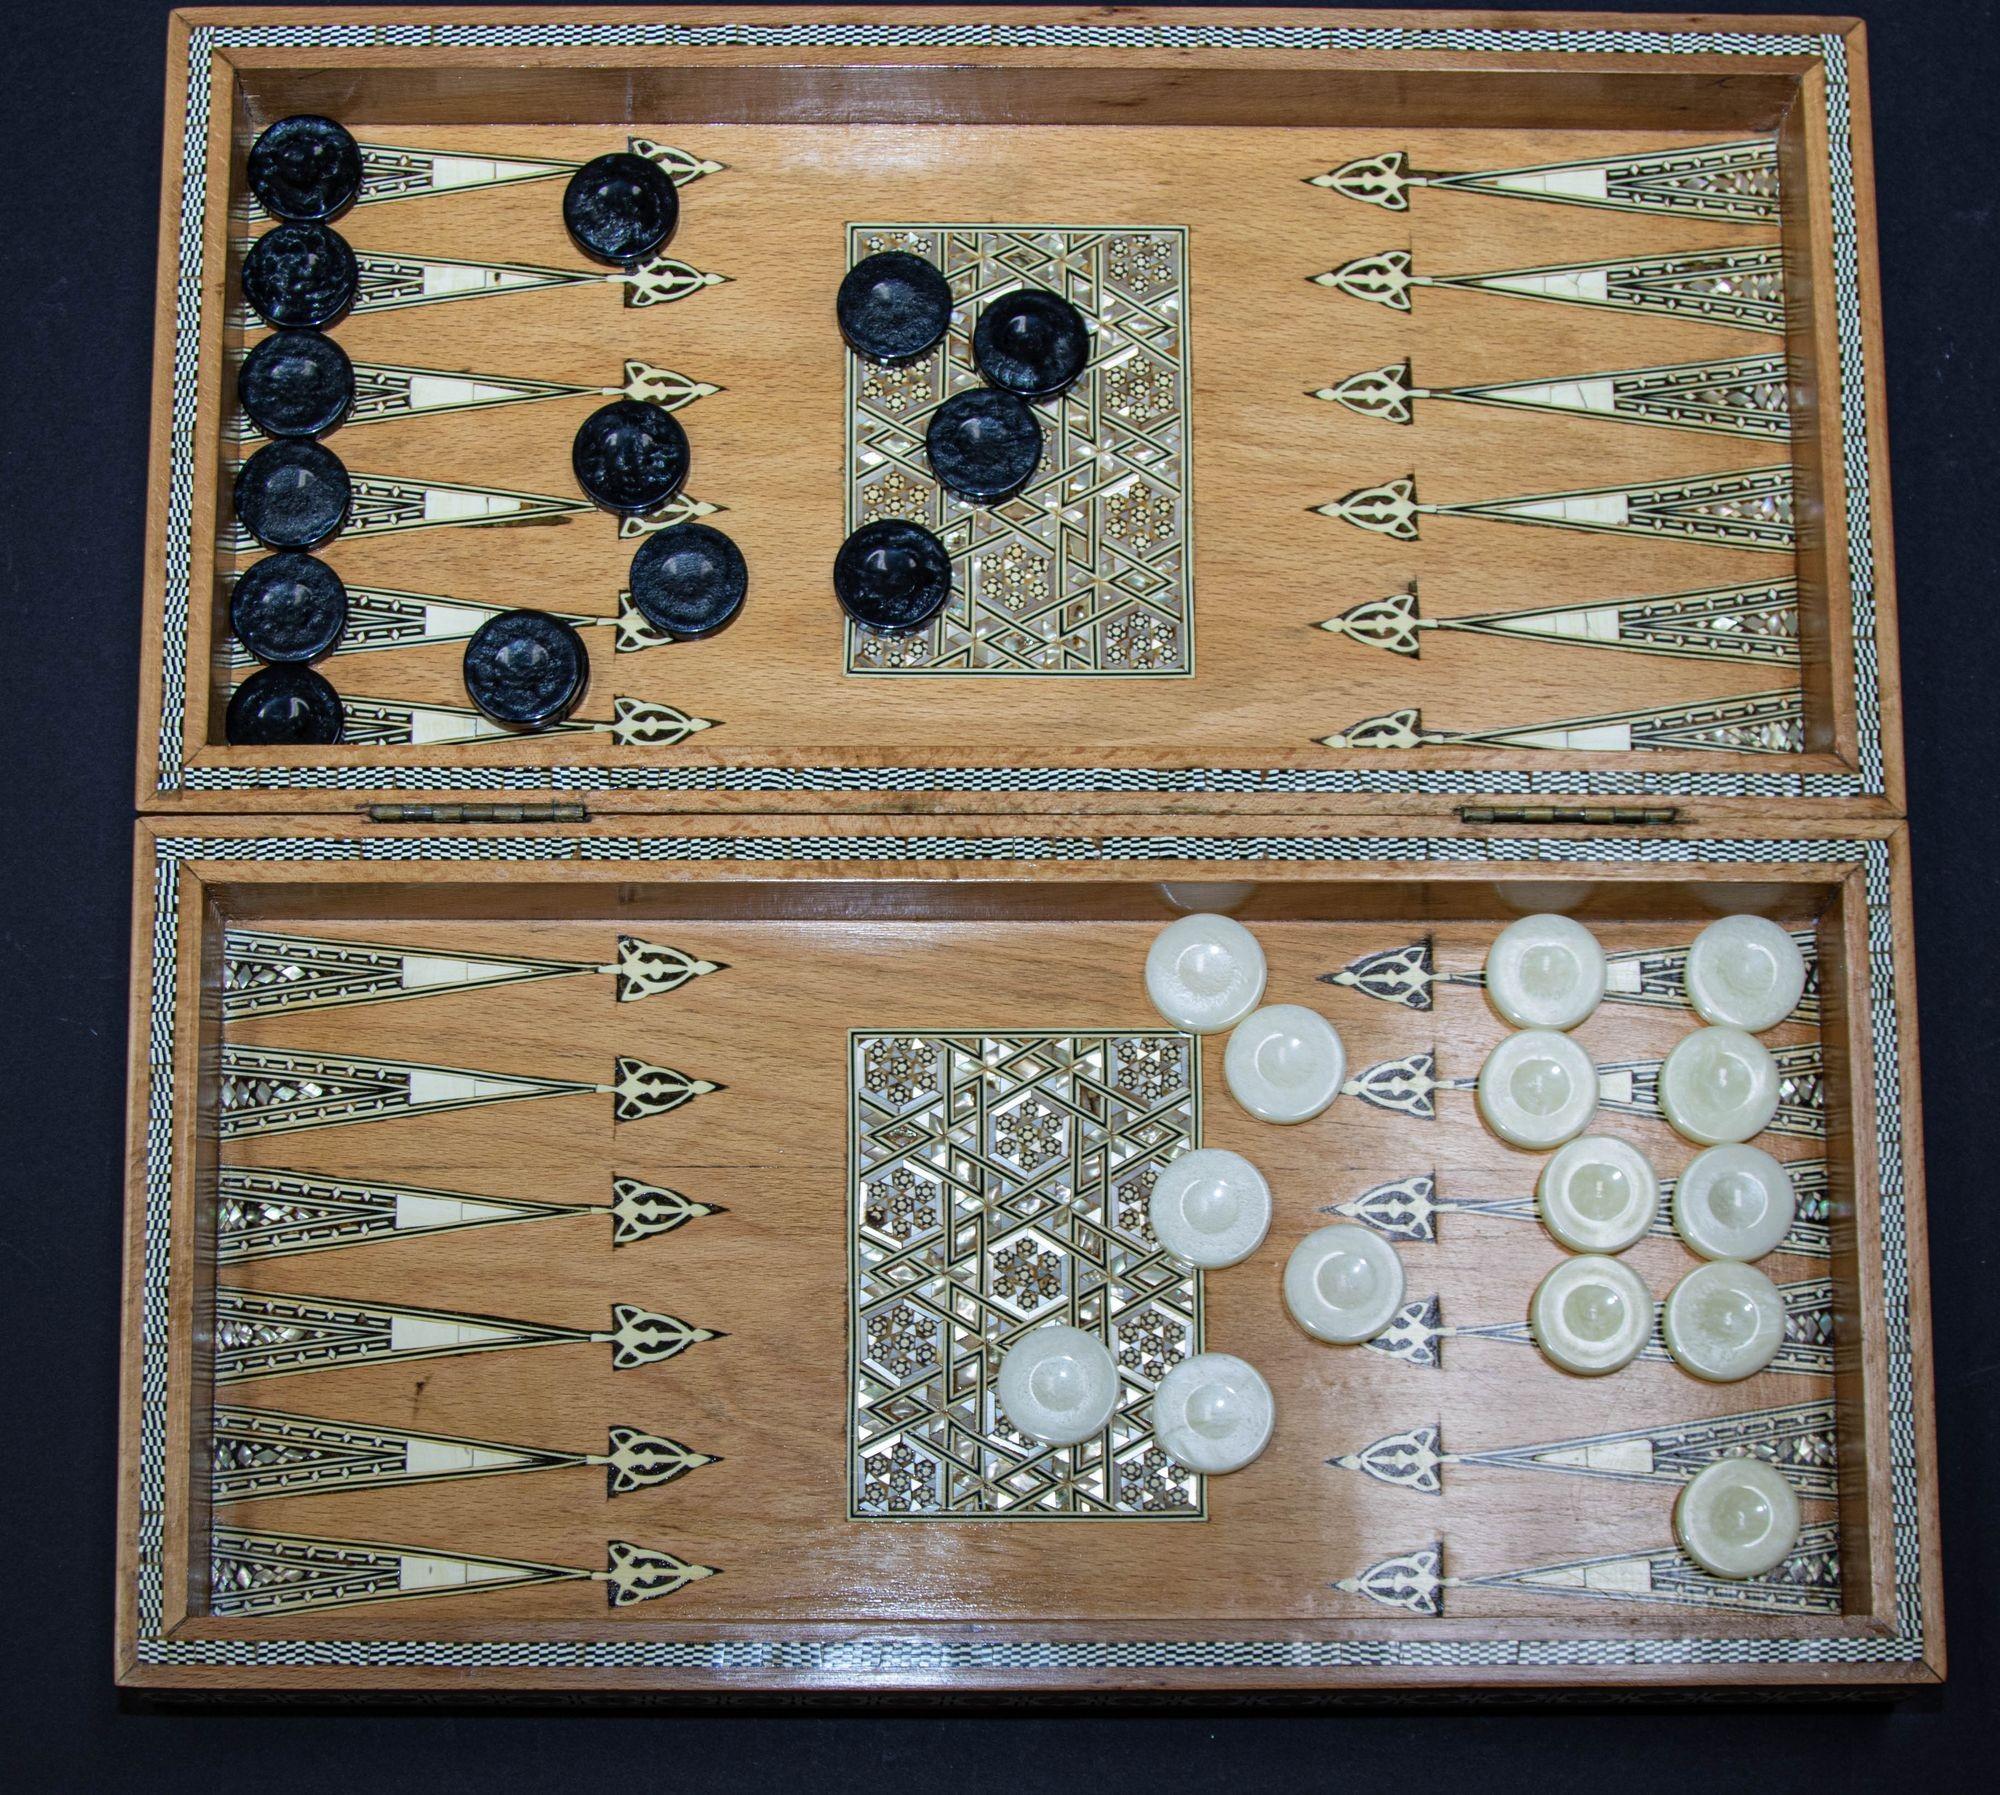 Anglo Indian Mother-of-Pearl inlaid Backgammon and Chess, Checker Box complete with game pieces.
A large and rare Anglo Indian checker, chess and backgammon box, with a hinged lid that opens to a checker or chess board on the top, and a backgammon